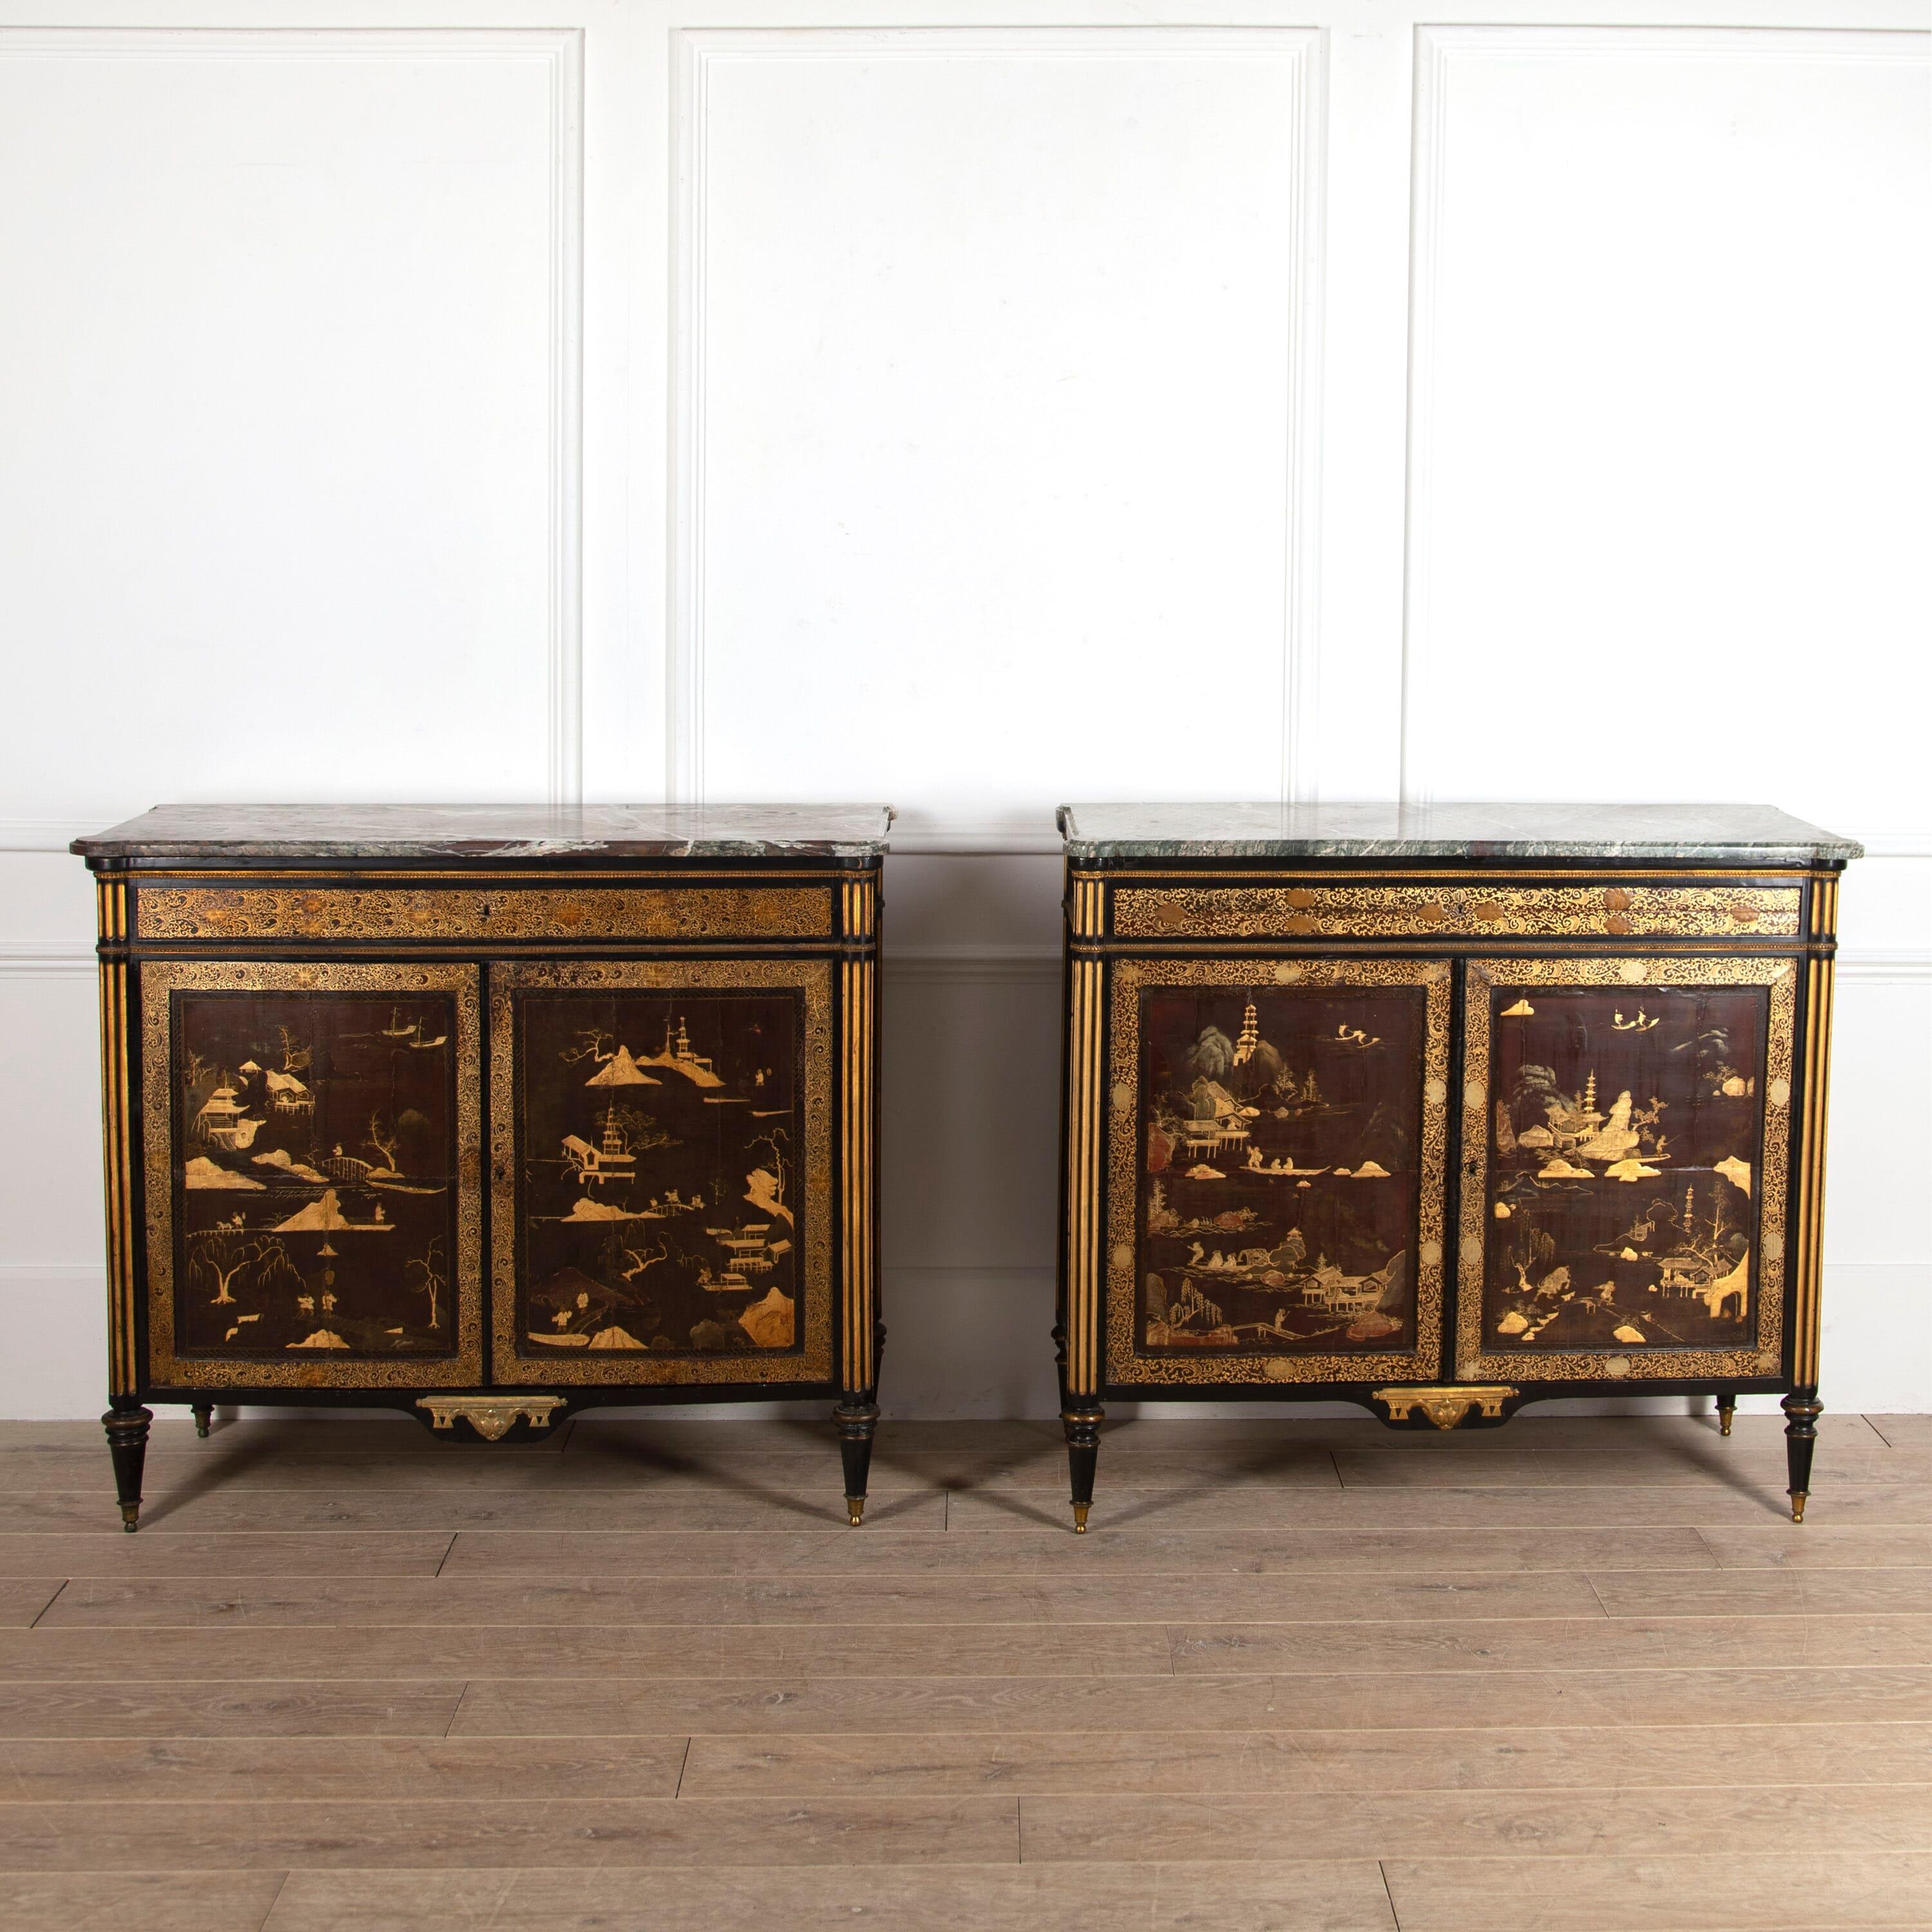 An exceptional pair of French Directoire period cabinets profusely decorated with Chinoiserie lacquer.

Each buffet has been constructed from the panels of an early 18th Century Chinese lacquered screen with the interiors charmingly showing the